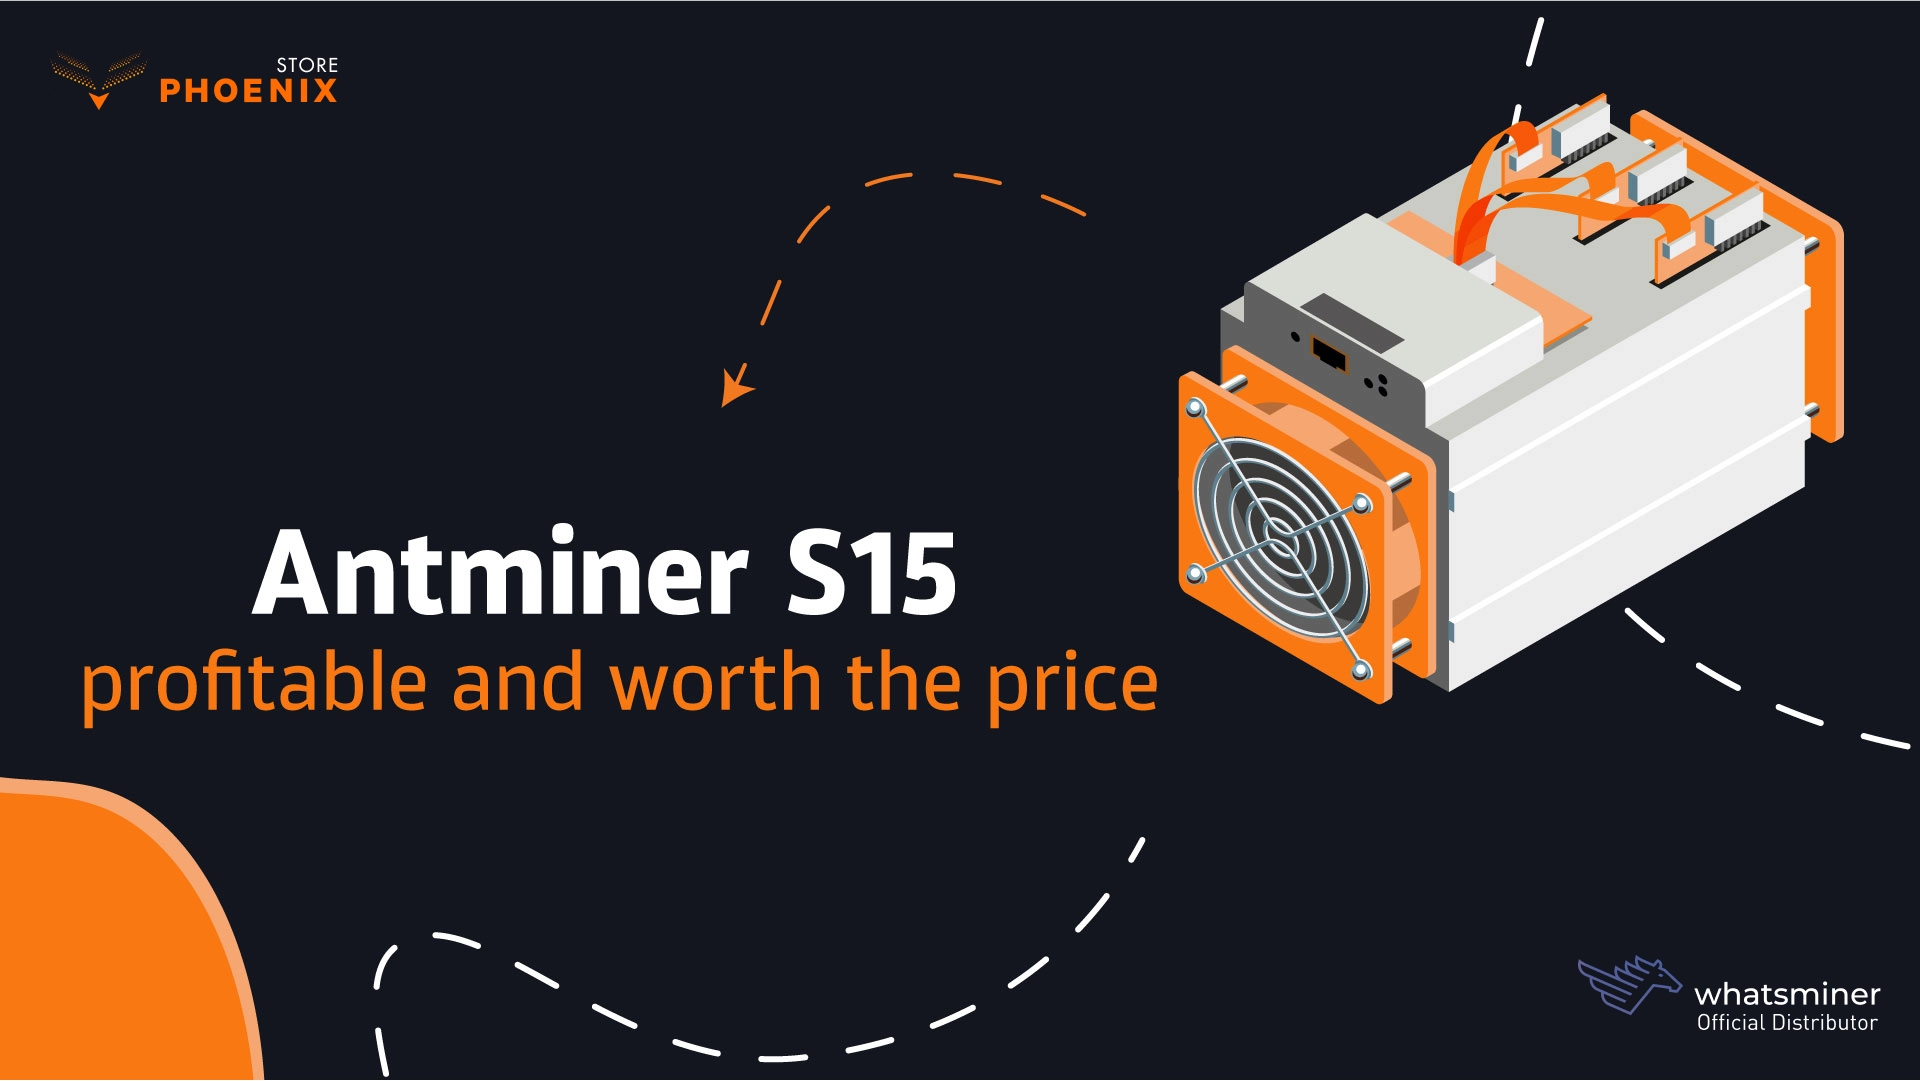 How Profitable Is the Antminer S15 And Is It Worth the Price?